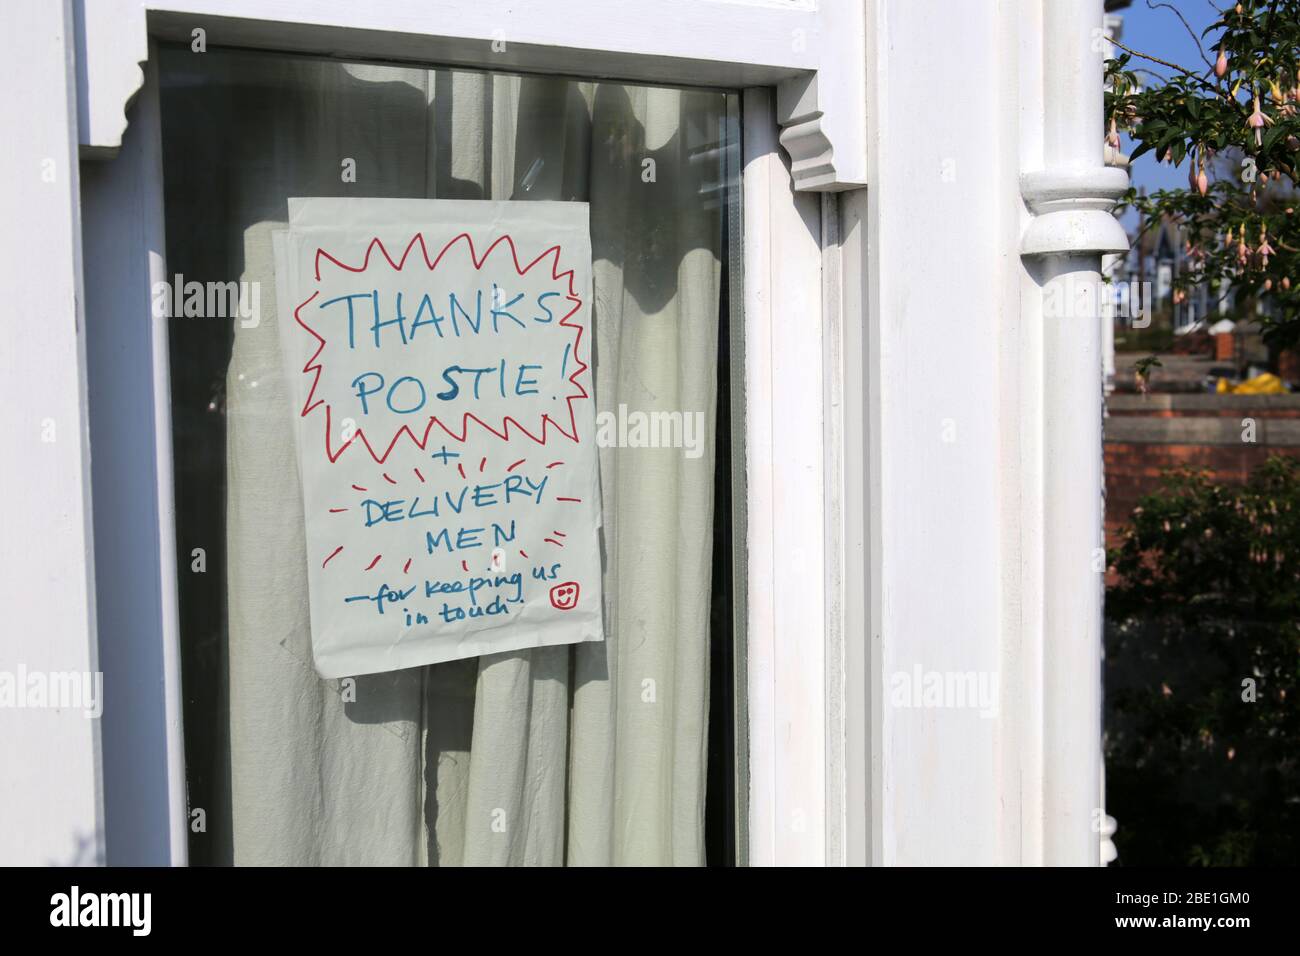 Homemade sign in a house window thanking postmen and deliverymen during the coronavirus lockdown Stock Photo